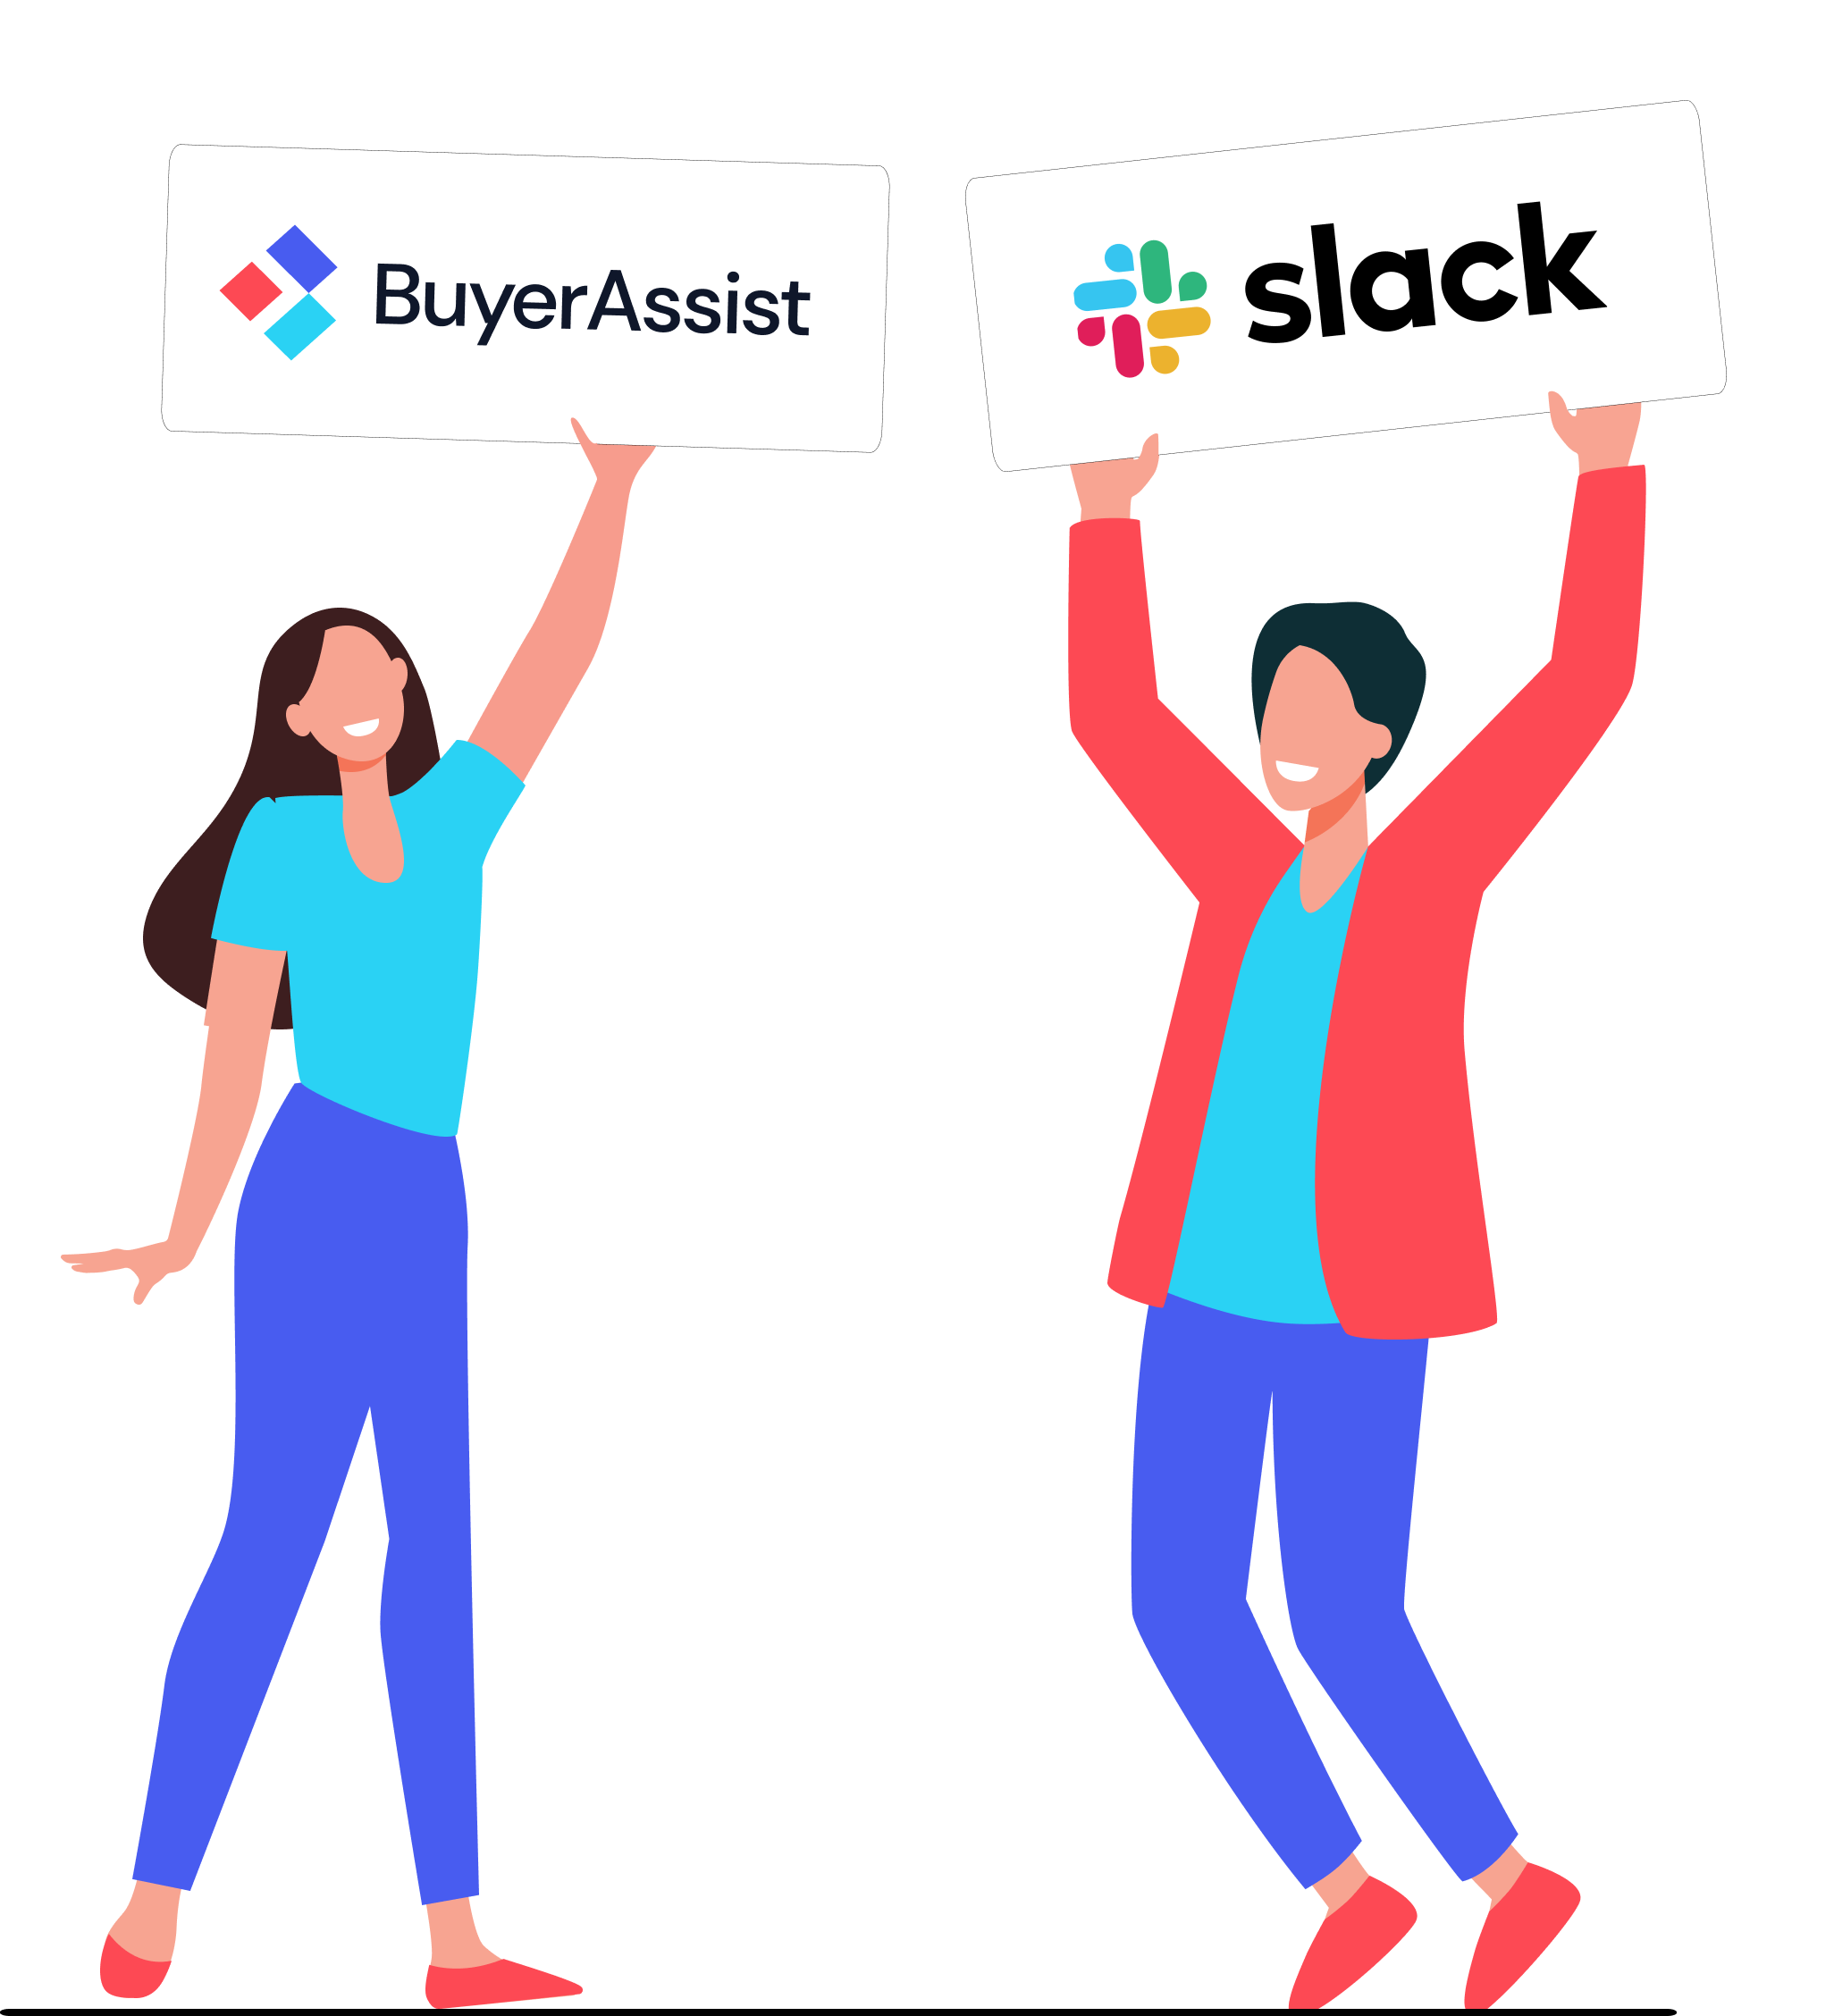 slack and buyerassist integrated featured image